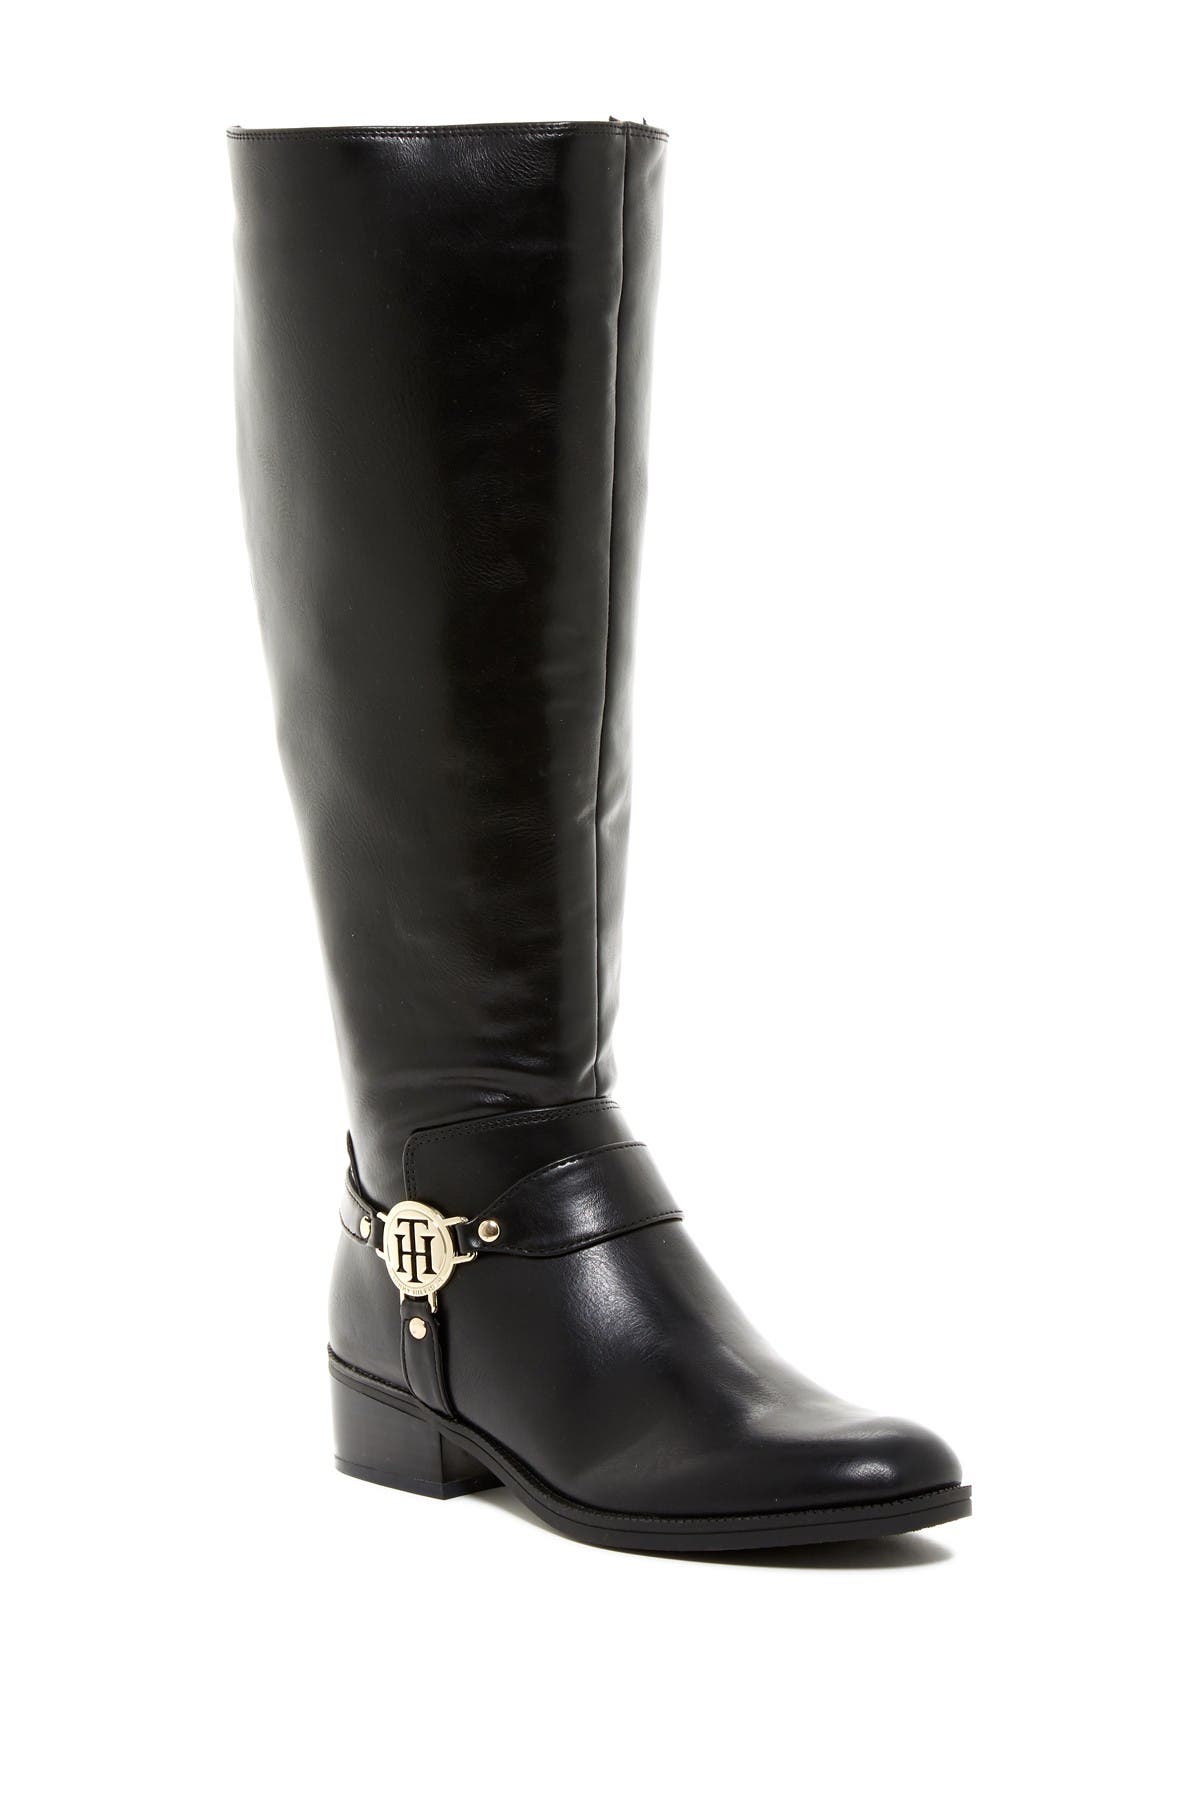 tommy hilfiger wide calf riding boots